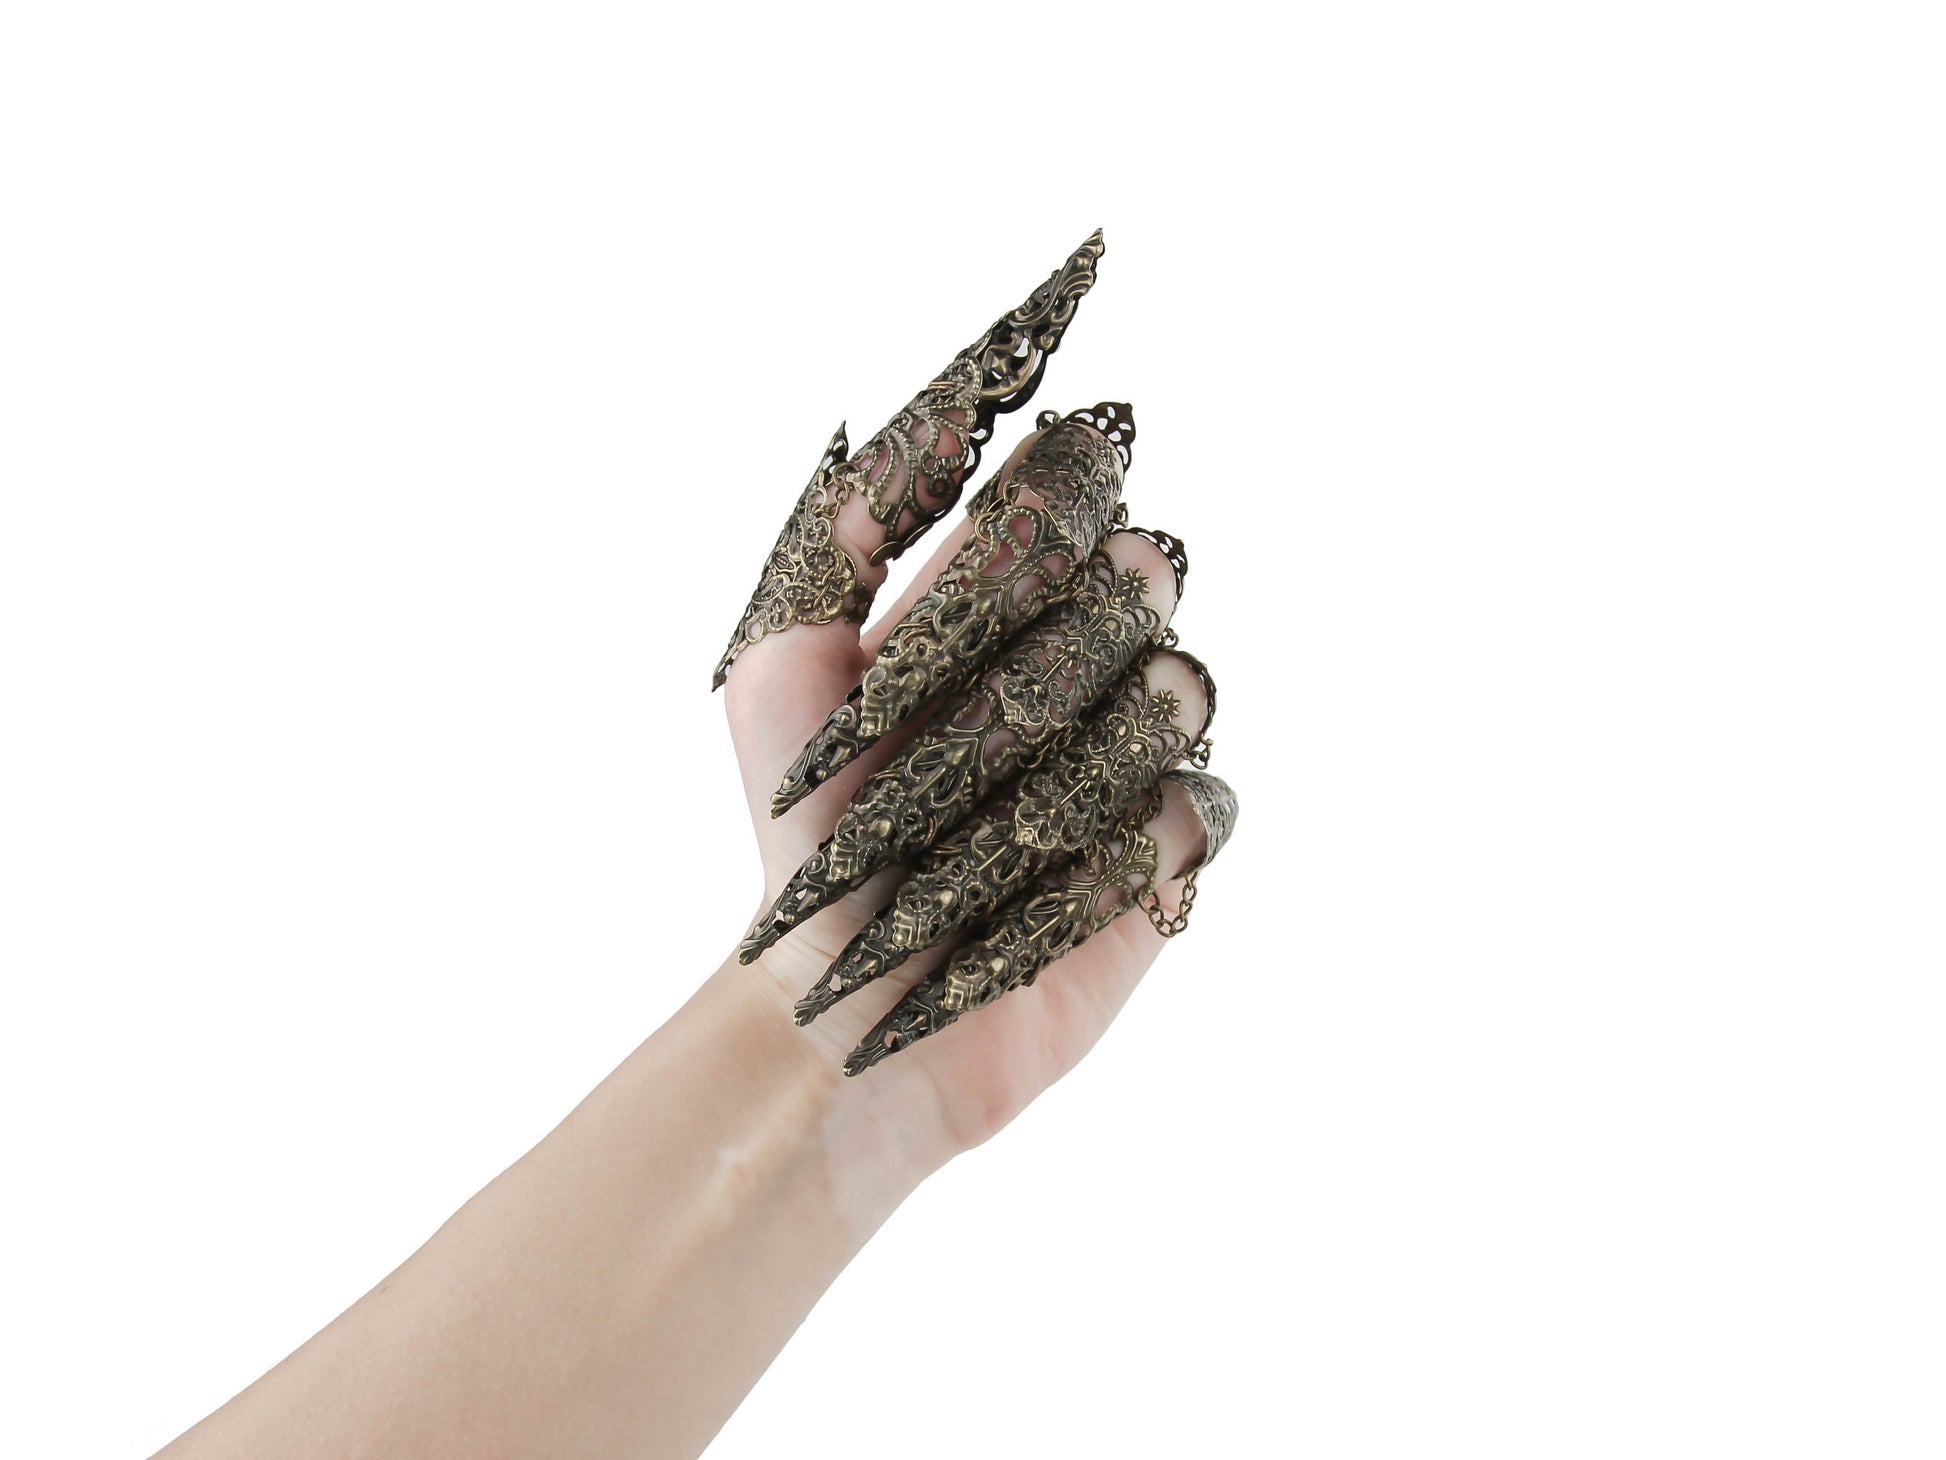 A hand adorned with a full set of bronze full-finger claw rings, designed by Myril Jewels, extends dramatically against a white backdrop. The intricate rings, resembling long nail claws, encapsulate a neo-gothic aesthetic, perfect for those who love bold, gothic-chic jewelry. Ideal for Halloween, festival occasions, or as a standout everyday accessory for the goth girlfriend or friend